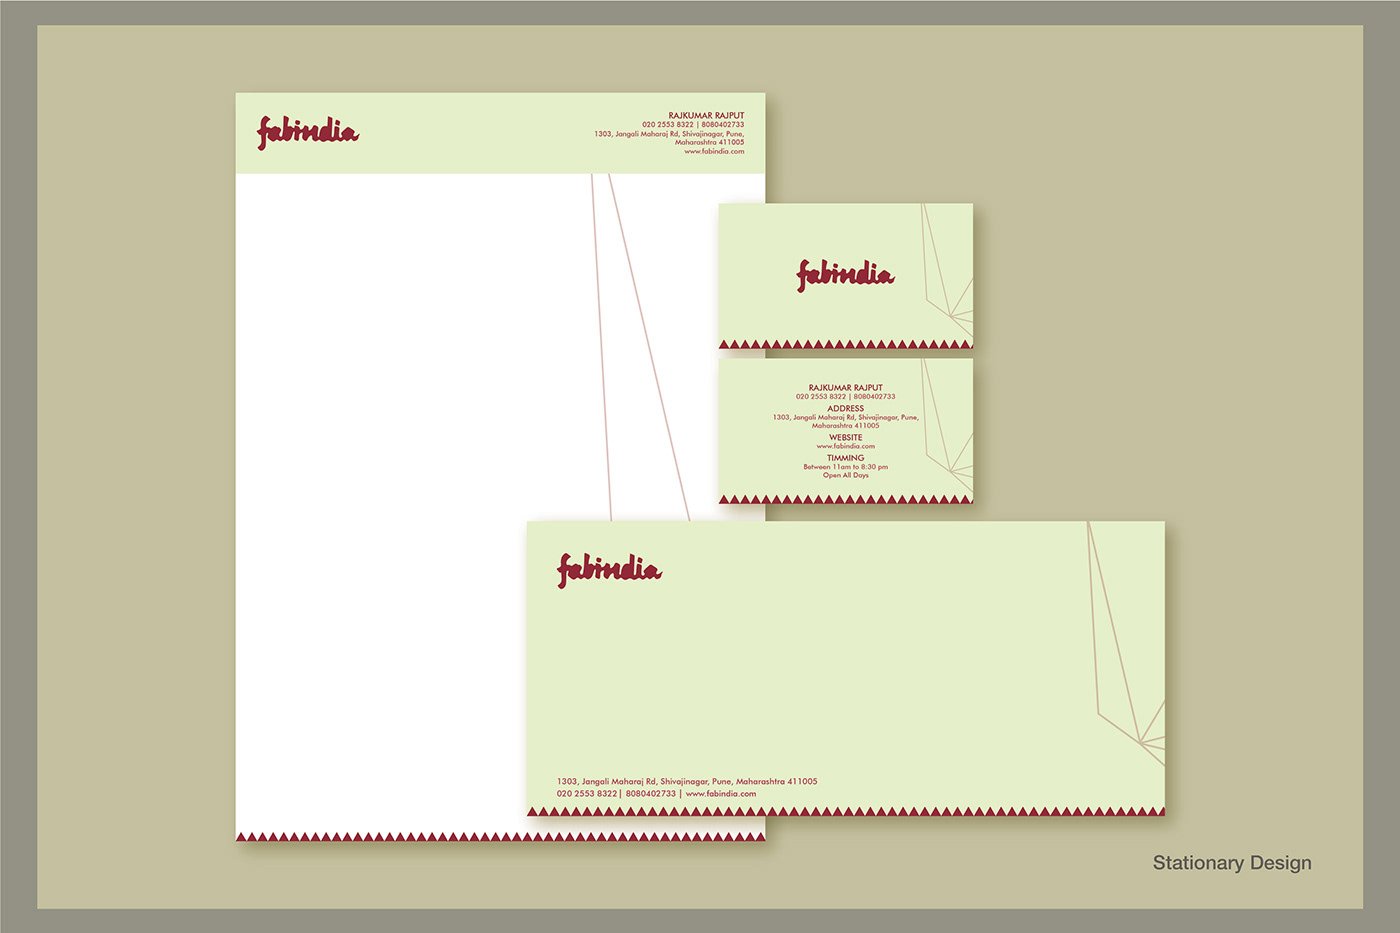 Advertising  concept card FABINDIA ILLUSTRATION  indian culture line art Shopping vector